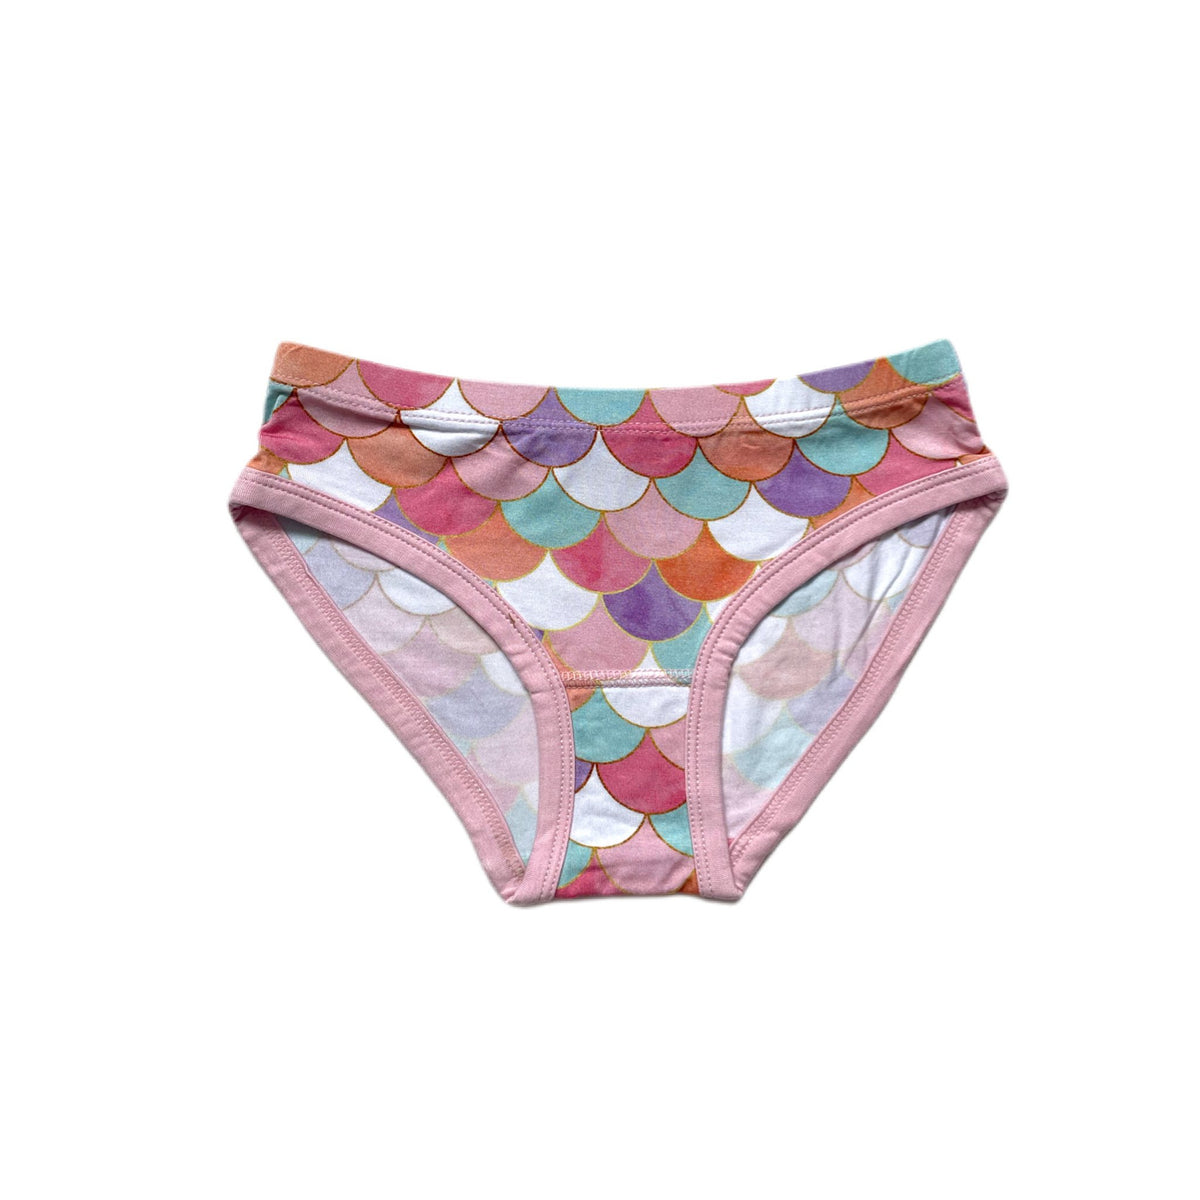 Girl's Two-Pack Underwear Set Modern Designs Made with Bamboo